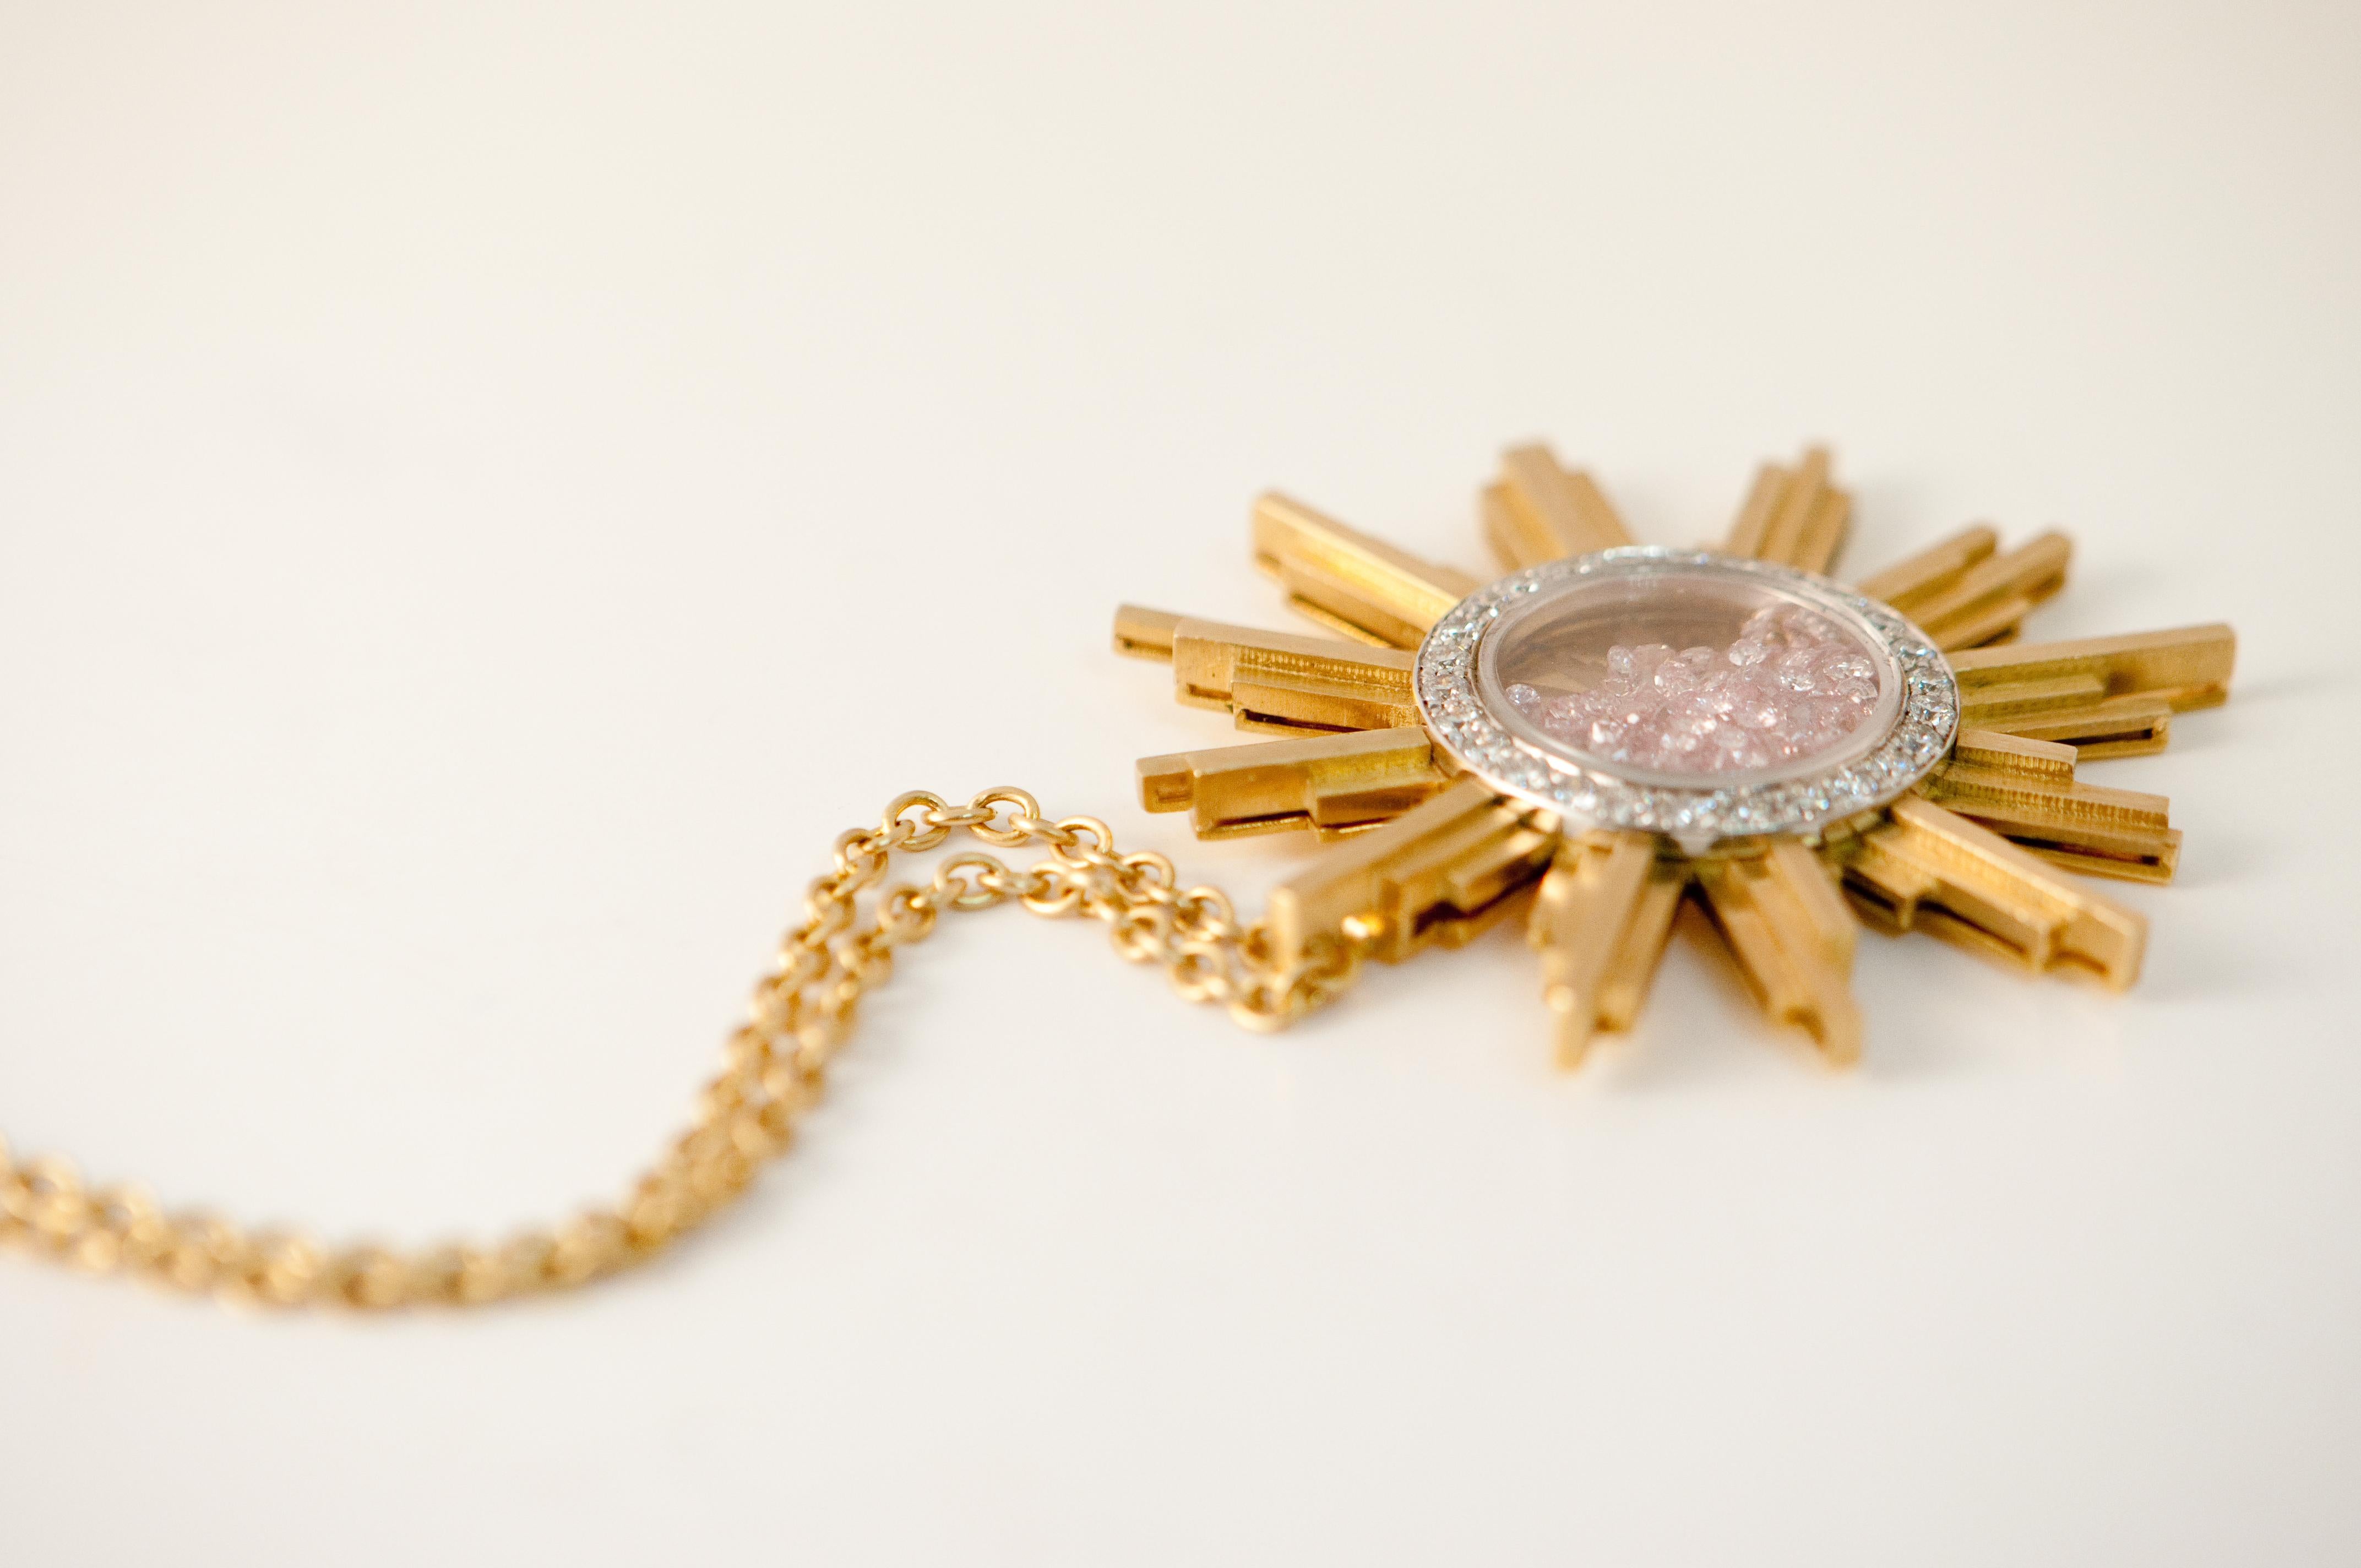 Necklace, Yellow Gold Sun 34 Grams, Diamonds Withe and Pink 2.27 Carat, Unique 1